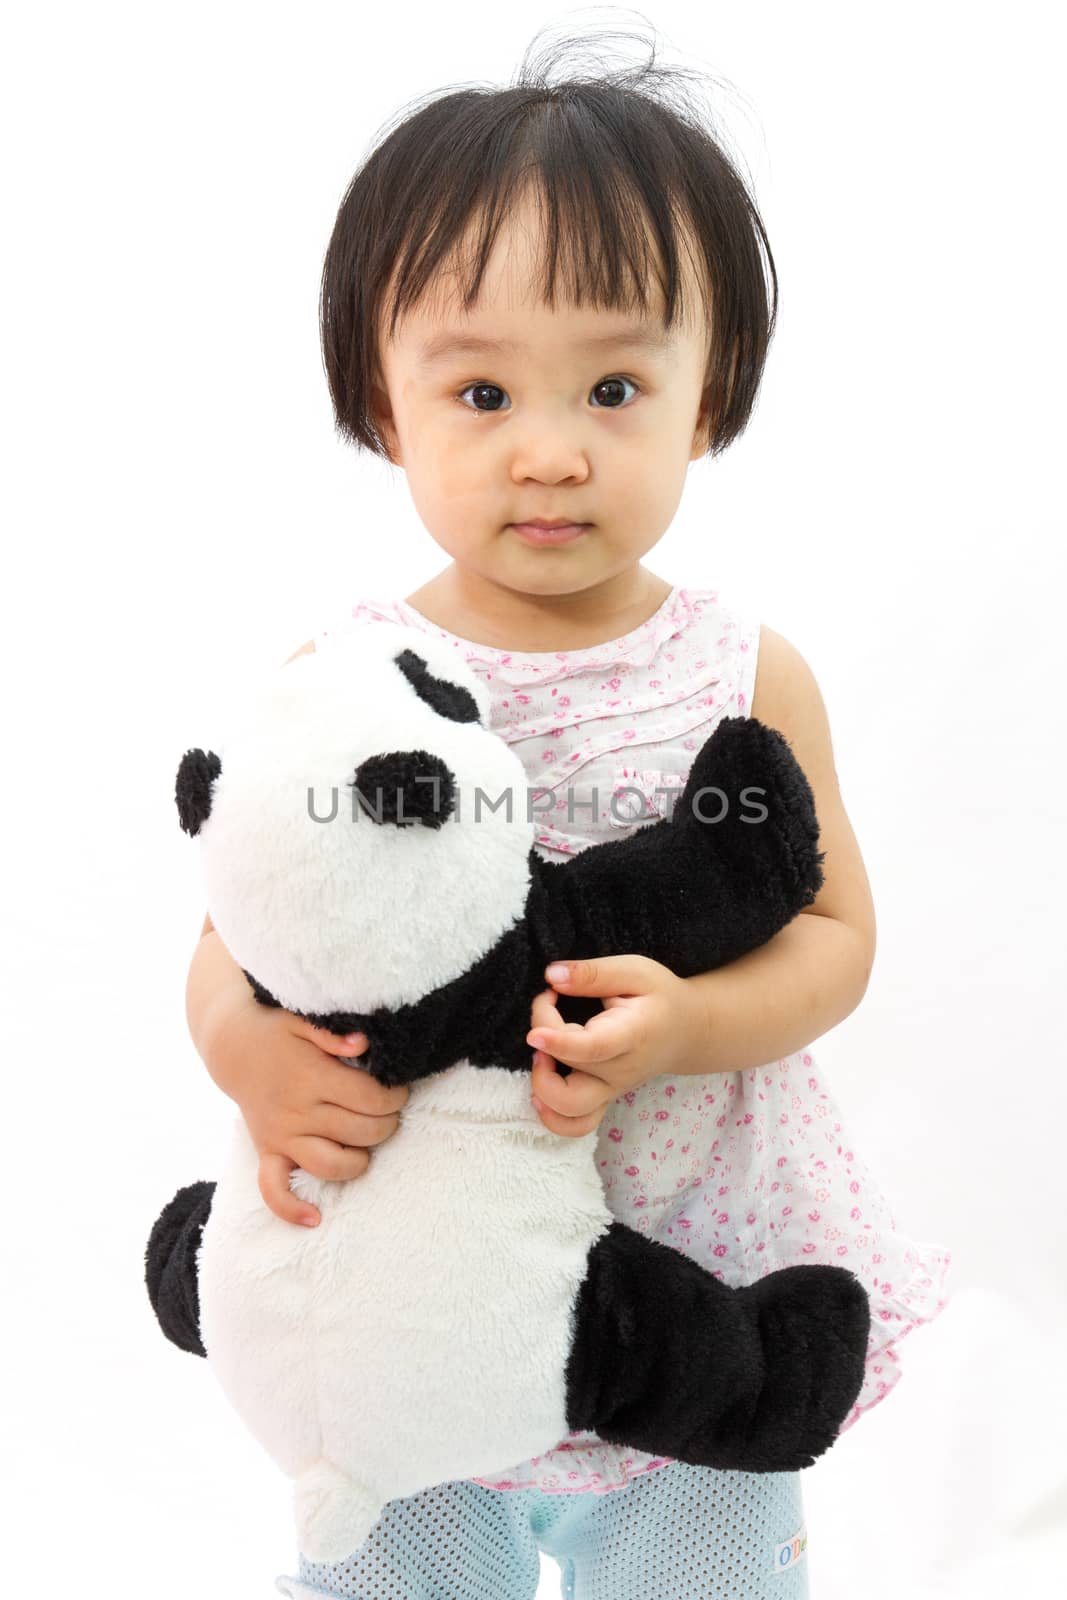 Chinese Little Girl Holding Panda Toy in plain white isolated background.